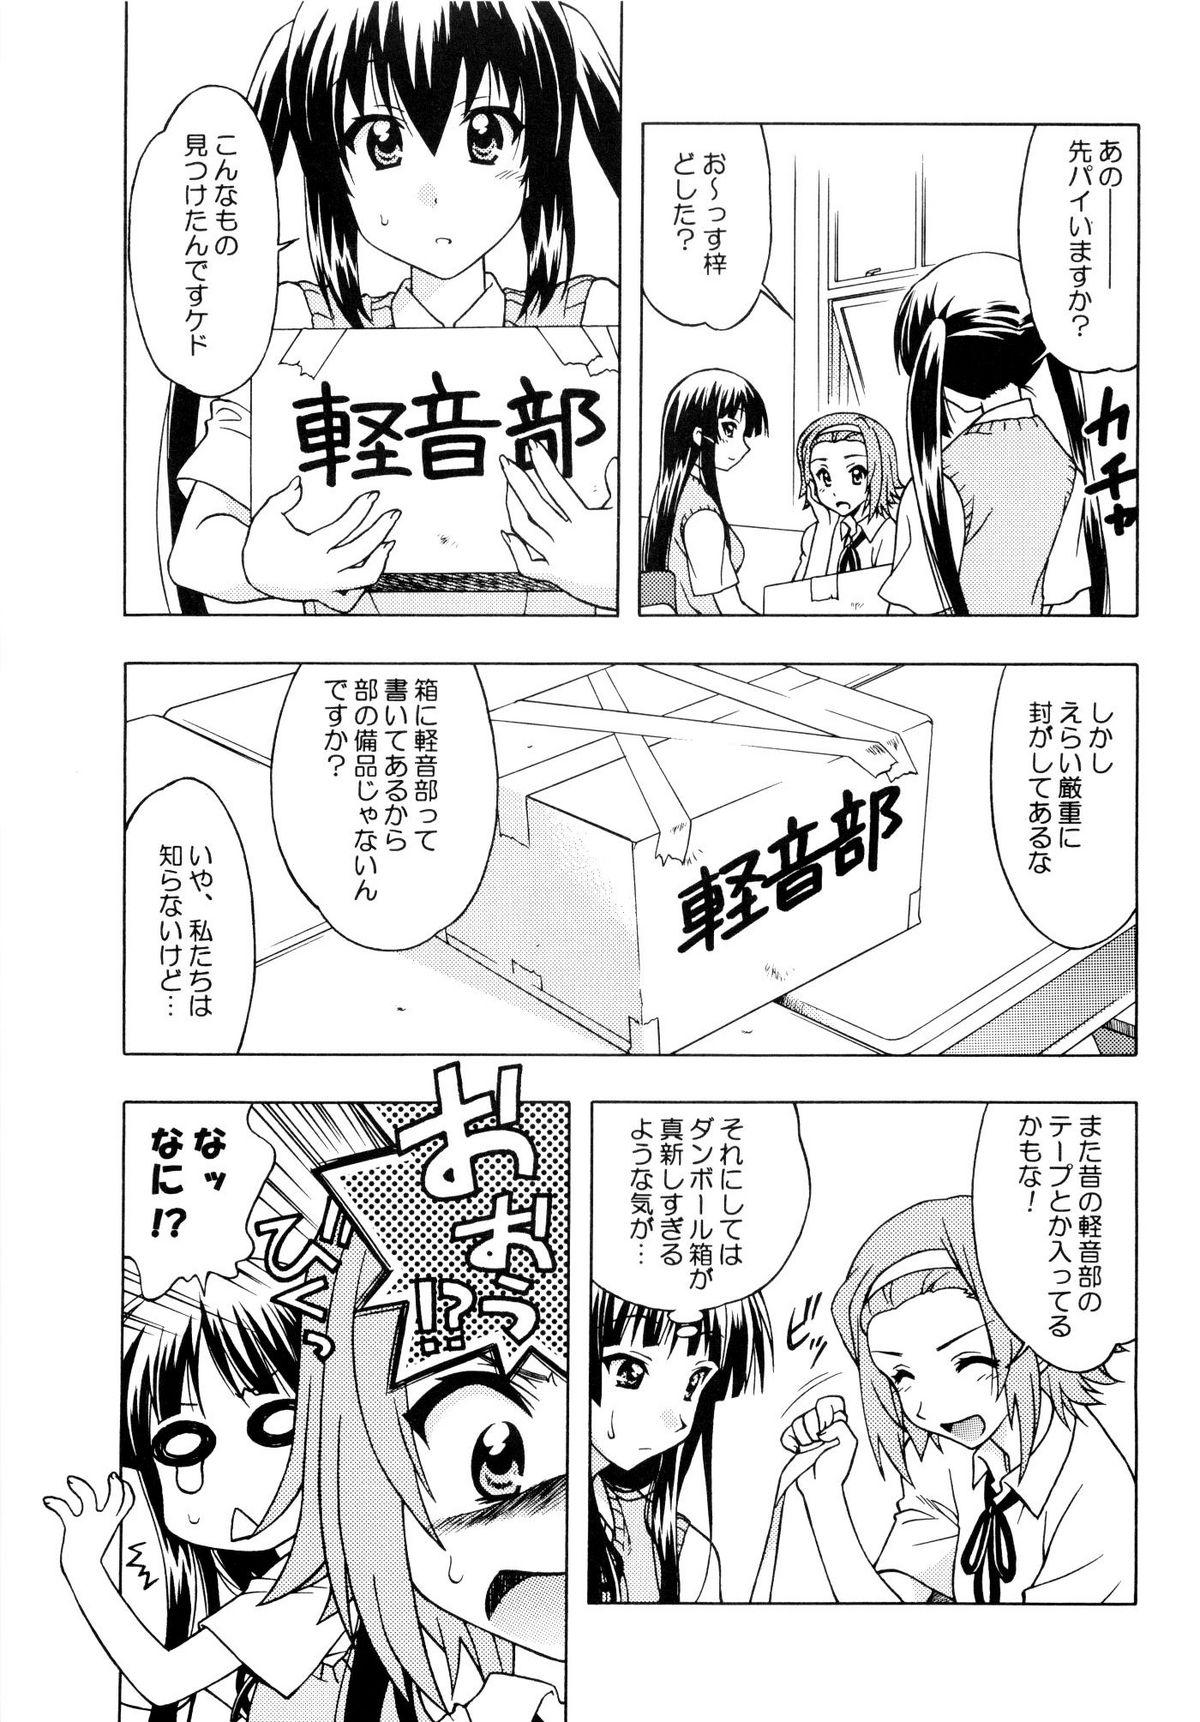 Cousin K-ON! BOX - K-on Chick - Page 2